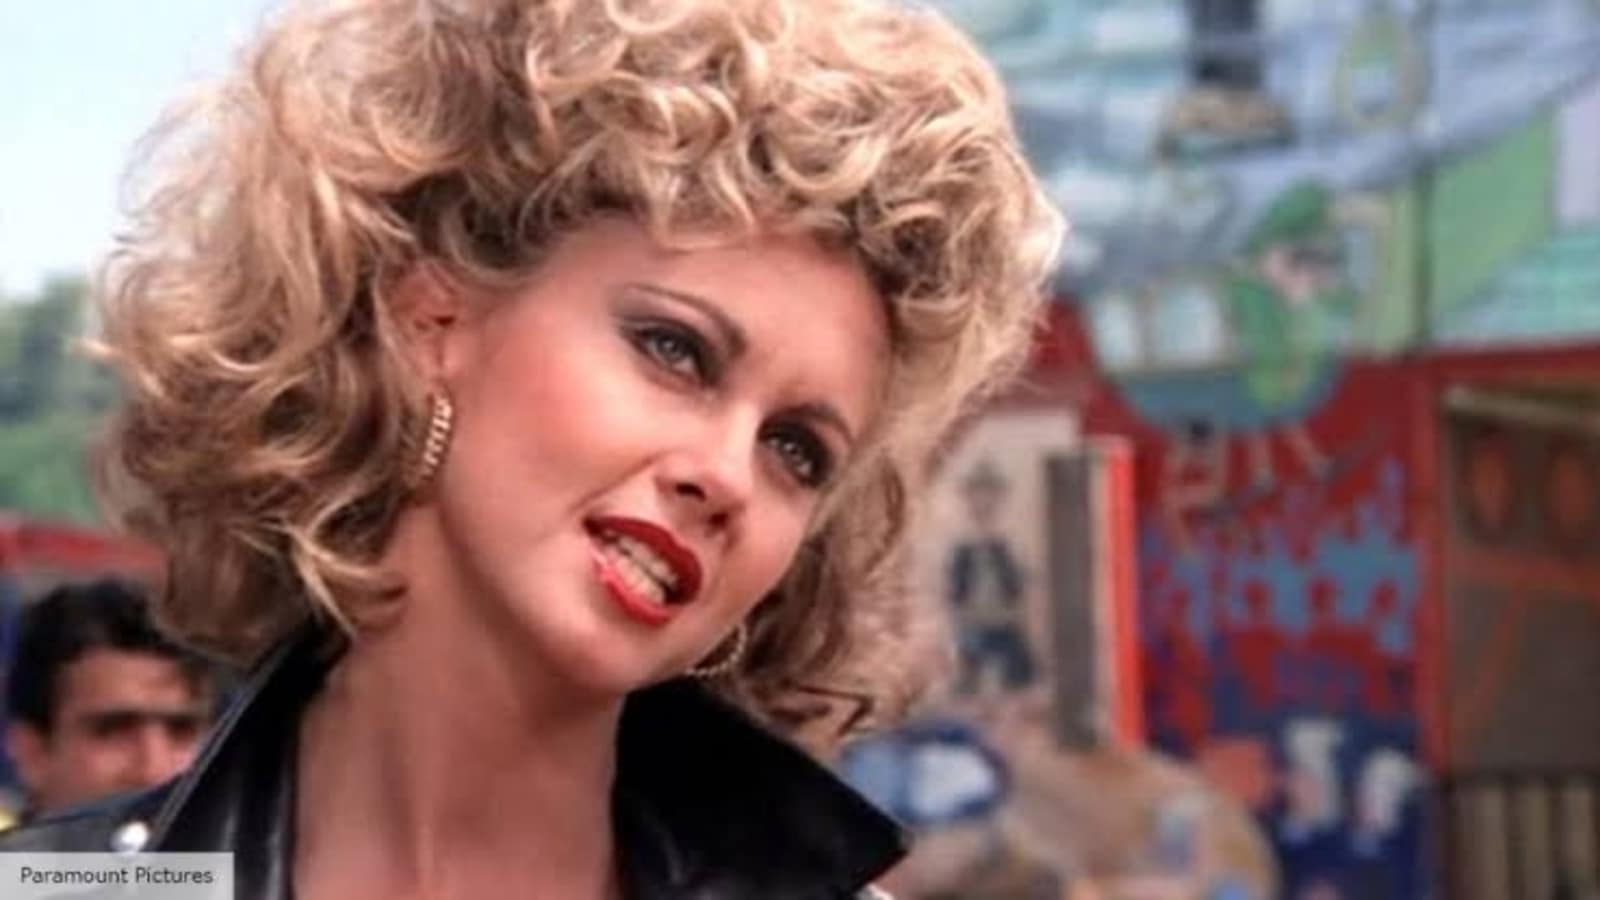 Pop music and Grease star Olivia Newton-John dead at age 73 Hollywood